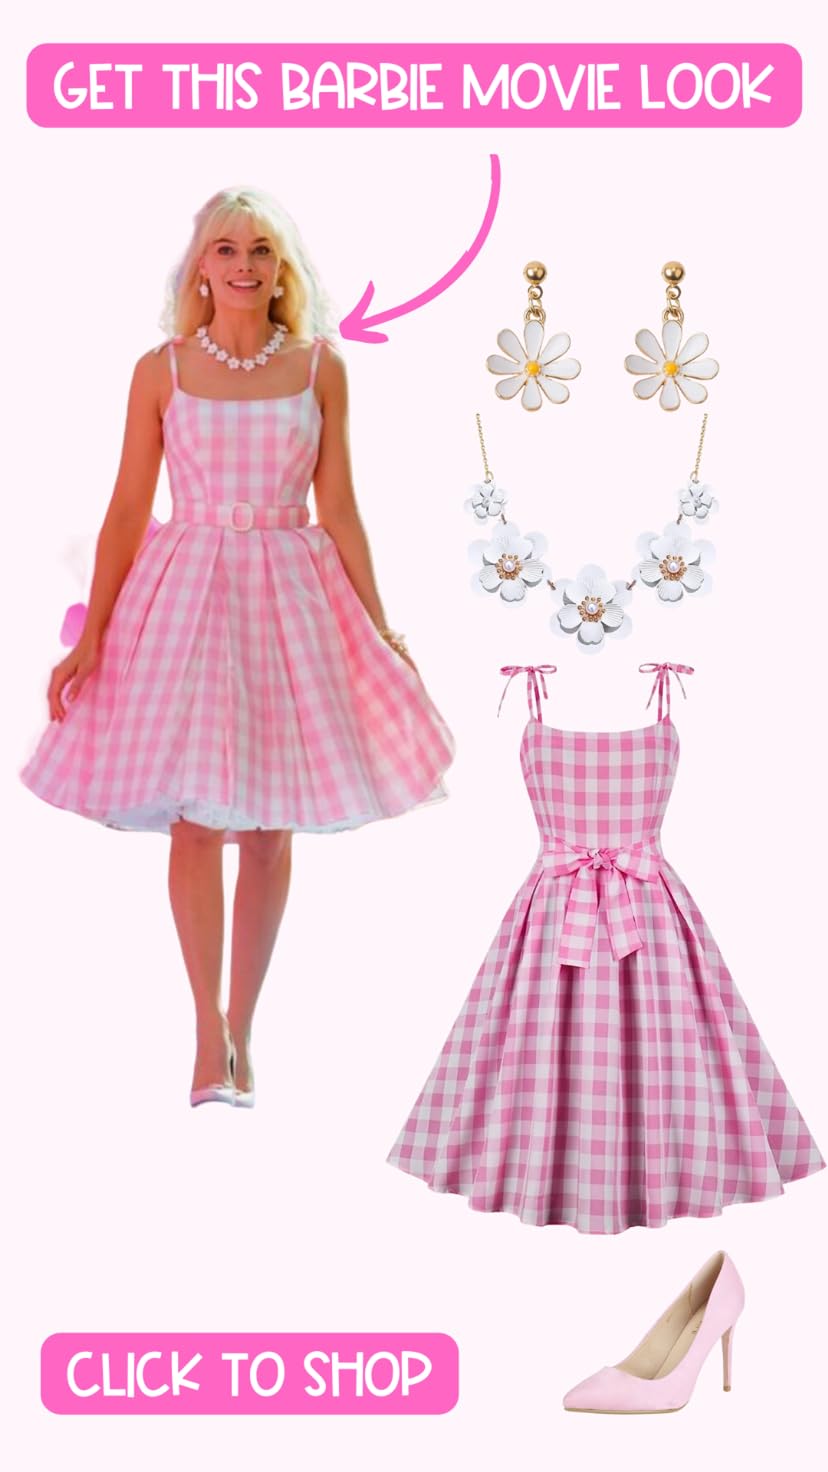 Did you love this look from the Barbie movie?? Here is how you can recreate it at home. This would be a great DIY Halloween costume.